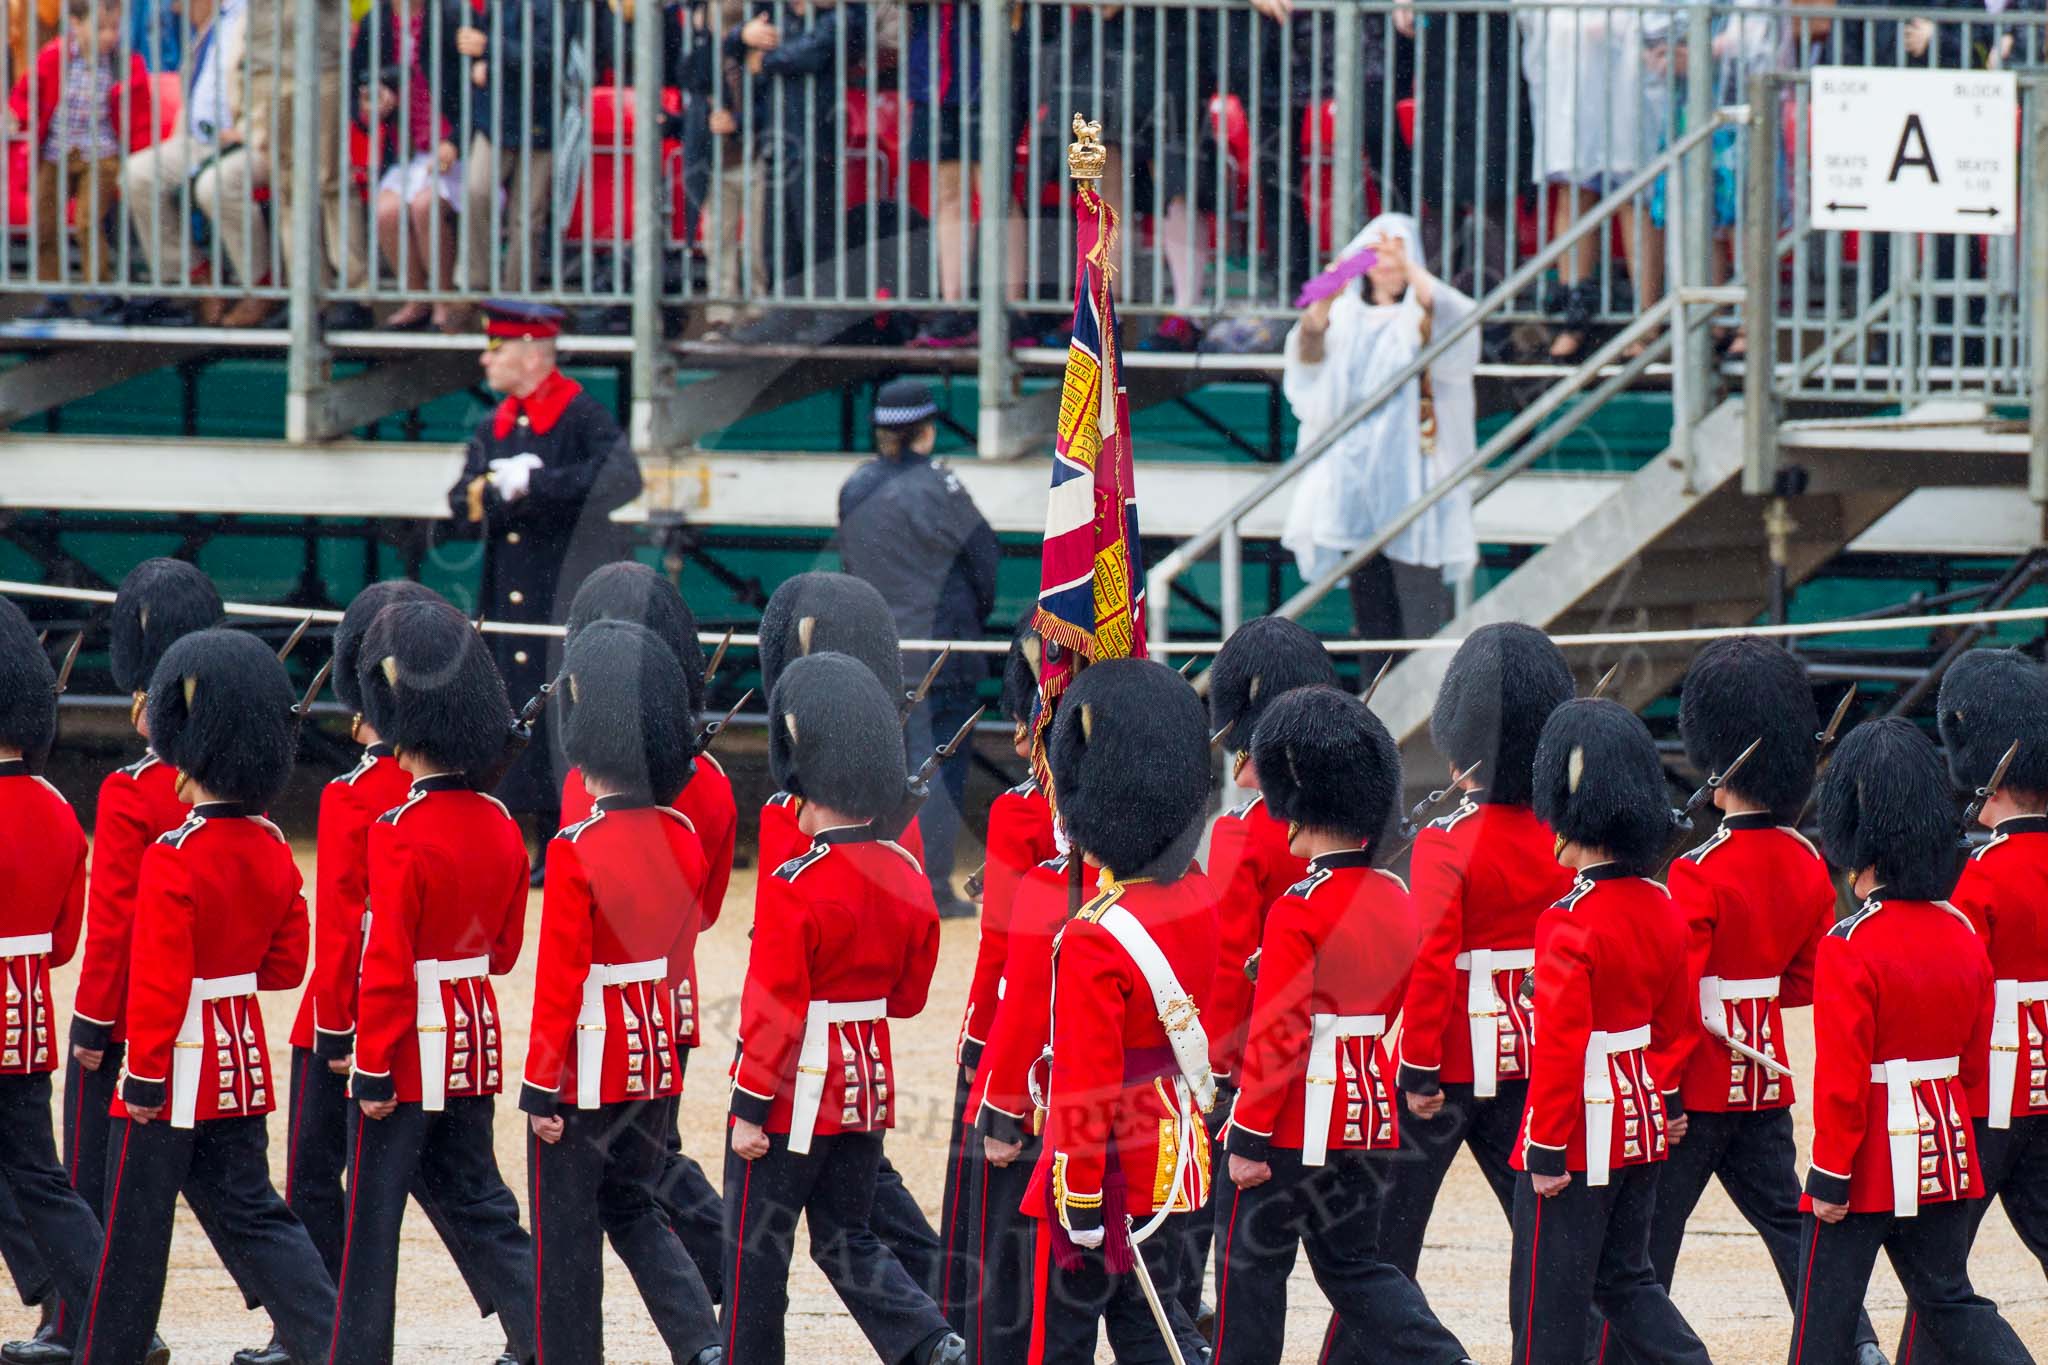 The Colonel's Review 2014.
Horse Guards Parade, Westminster,
London,

United Kingdom,
on 07 June 2014 at 11:23, image #419